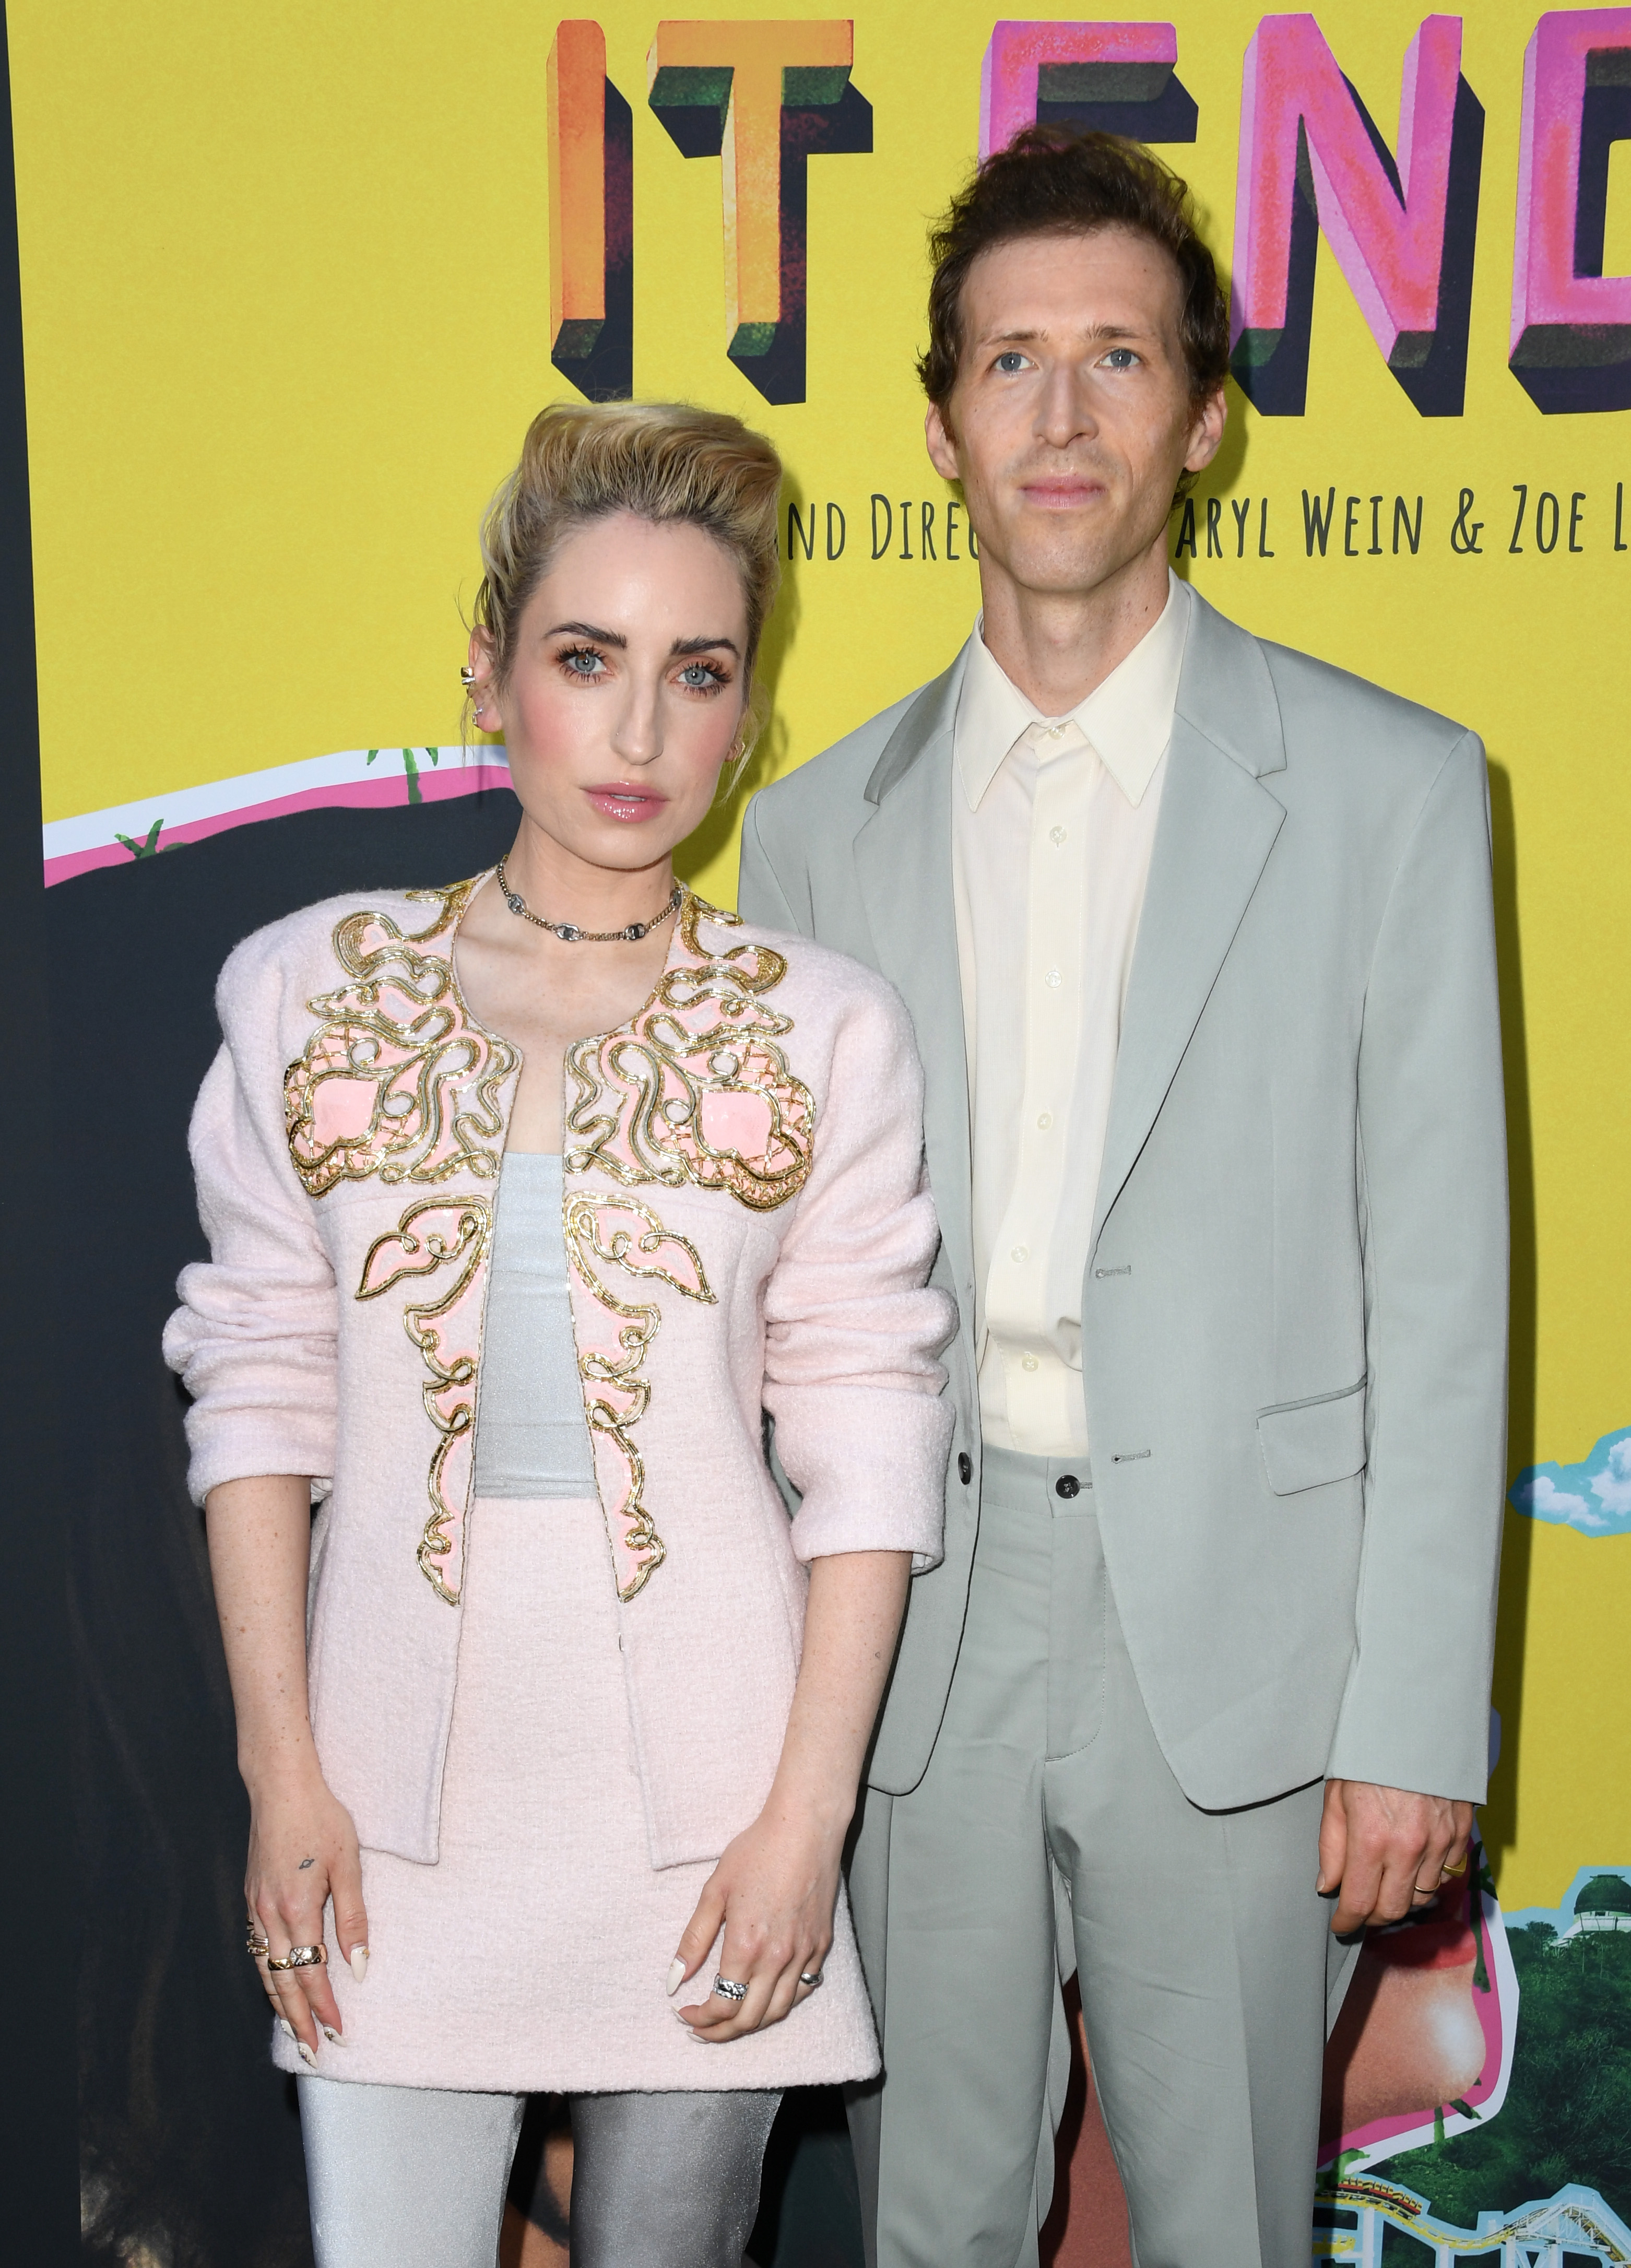 Zoe Lister-Jones and Daryl Wein at the Los Angeles Premiere of "How It Ends" on July 15, 2021, in Hollywood, California | Source: Getty Images